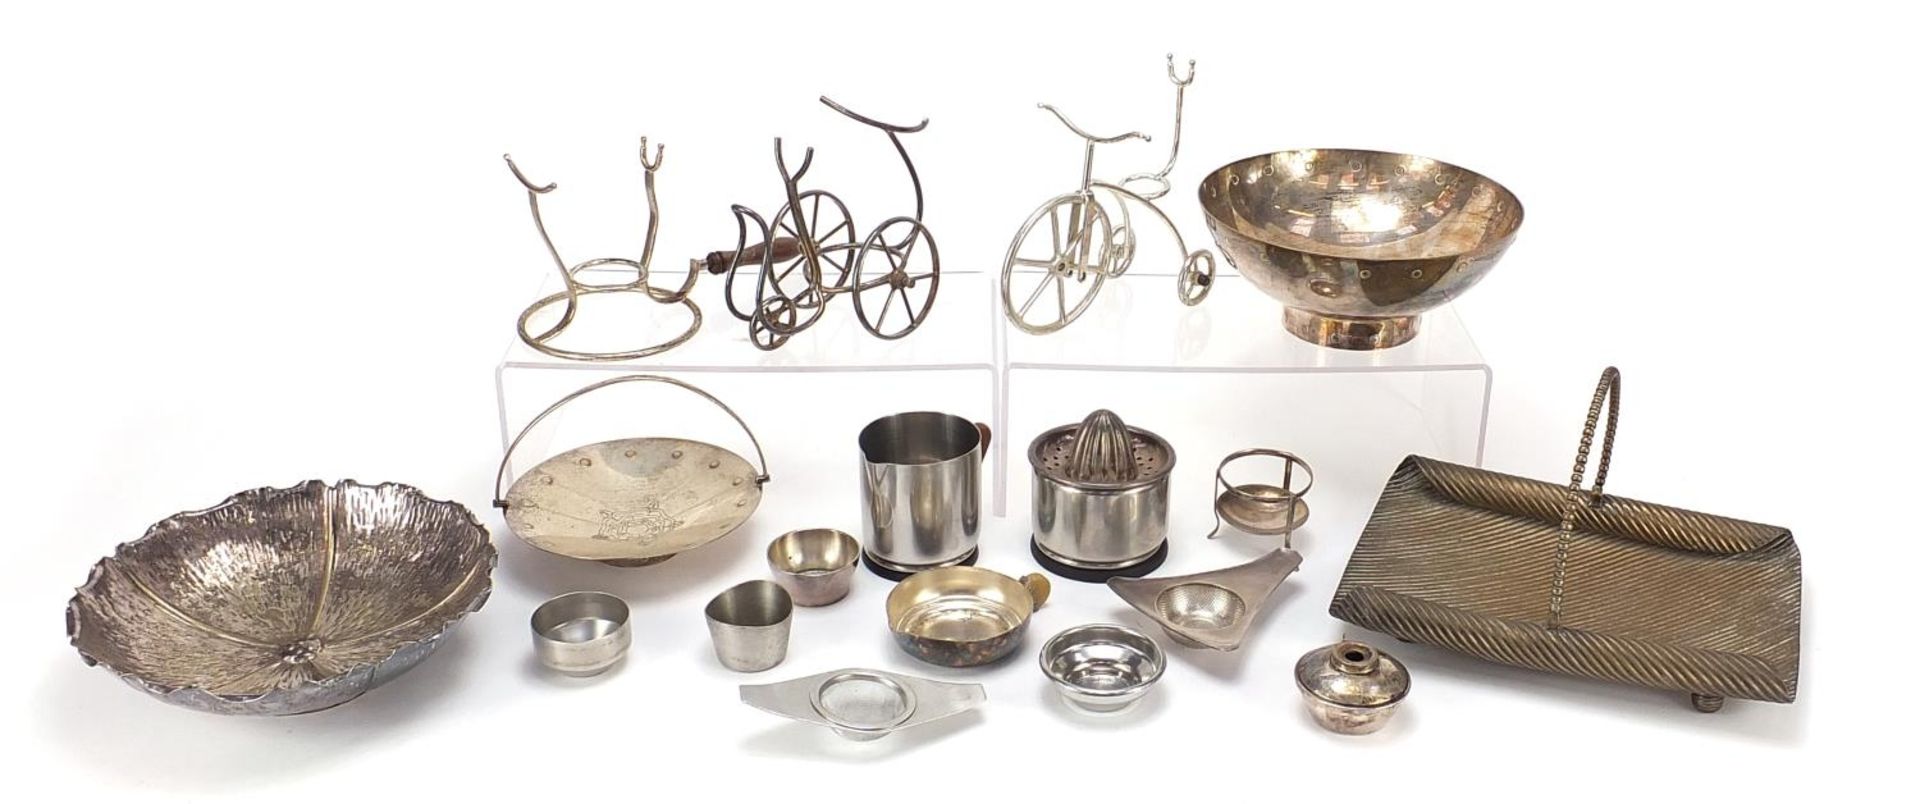 Decorative arts metalware including a Christopher Dresser basket with swing handle and Danish